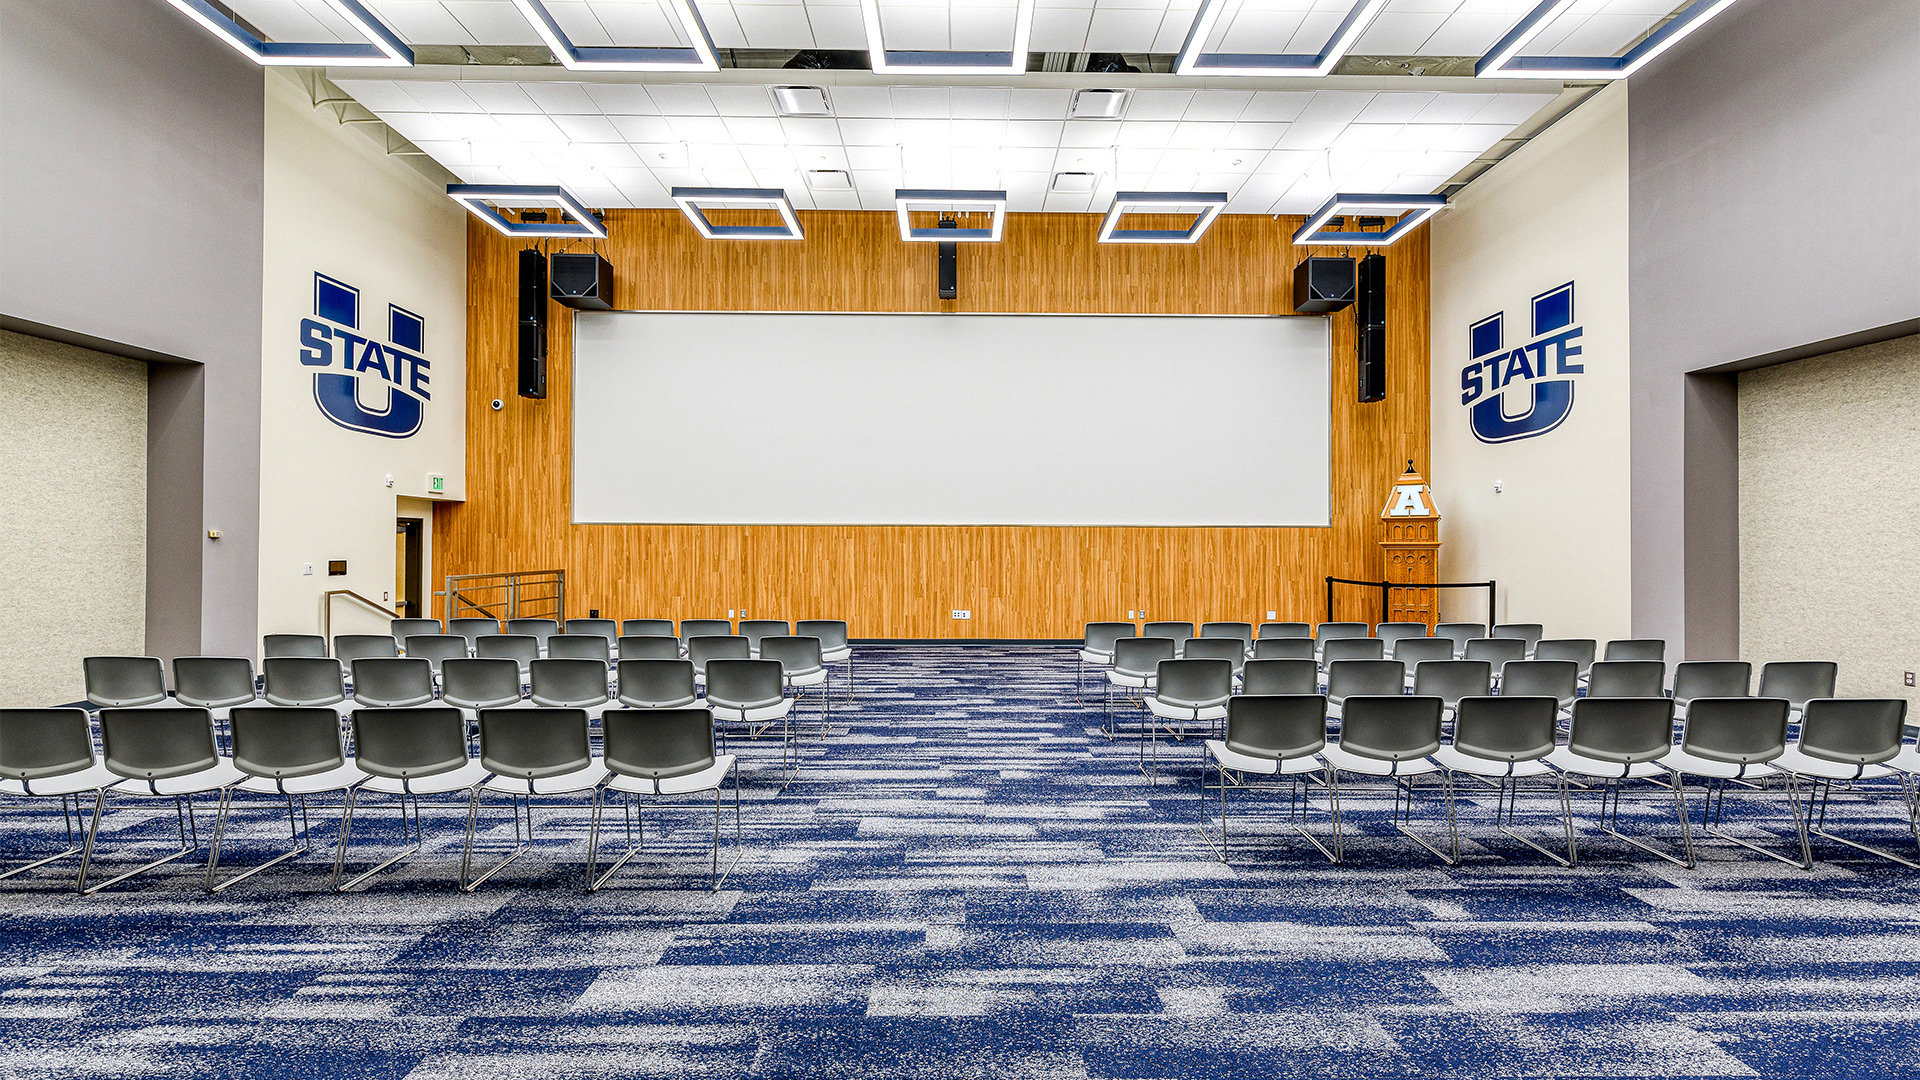 Taggart Student CenterBig Blue Room